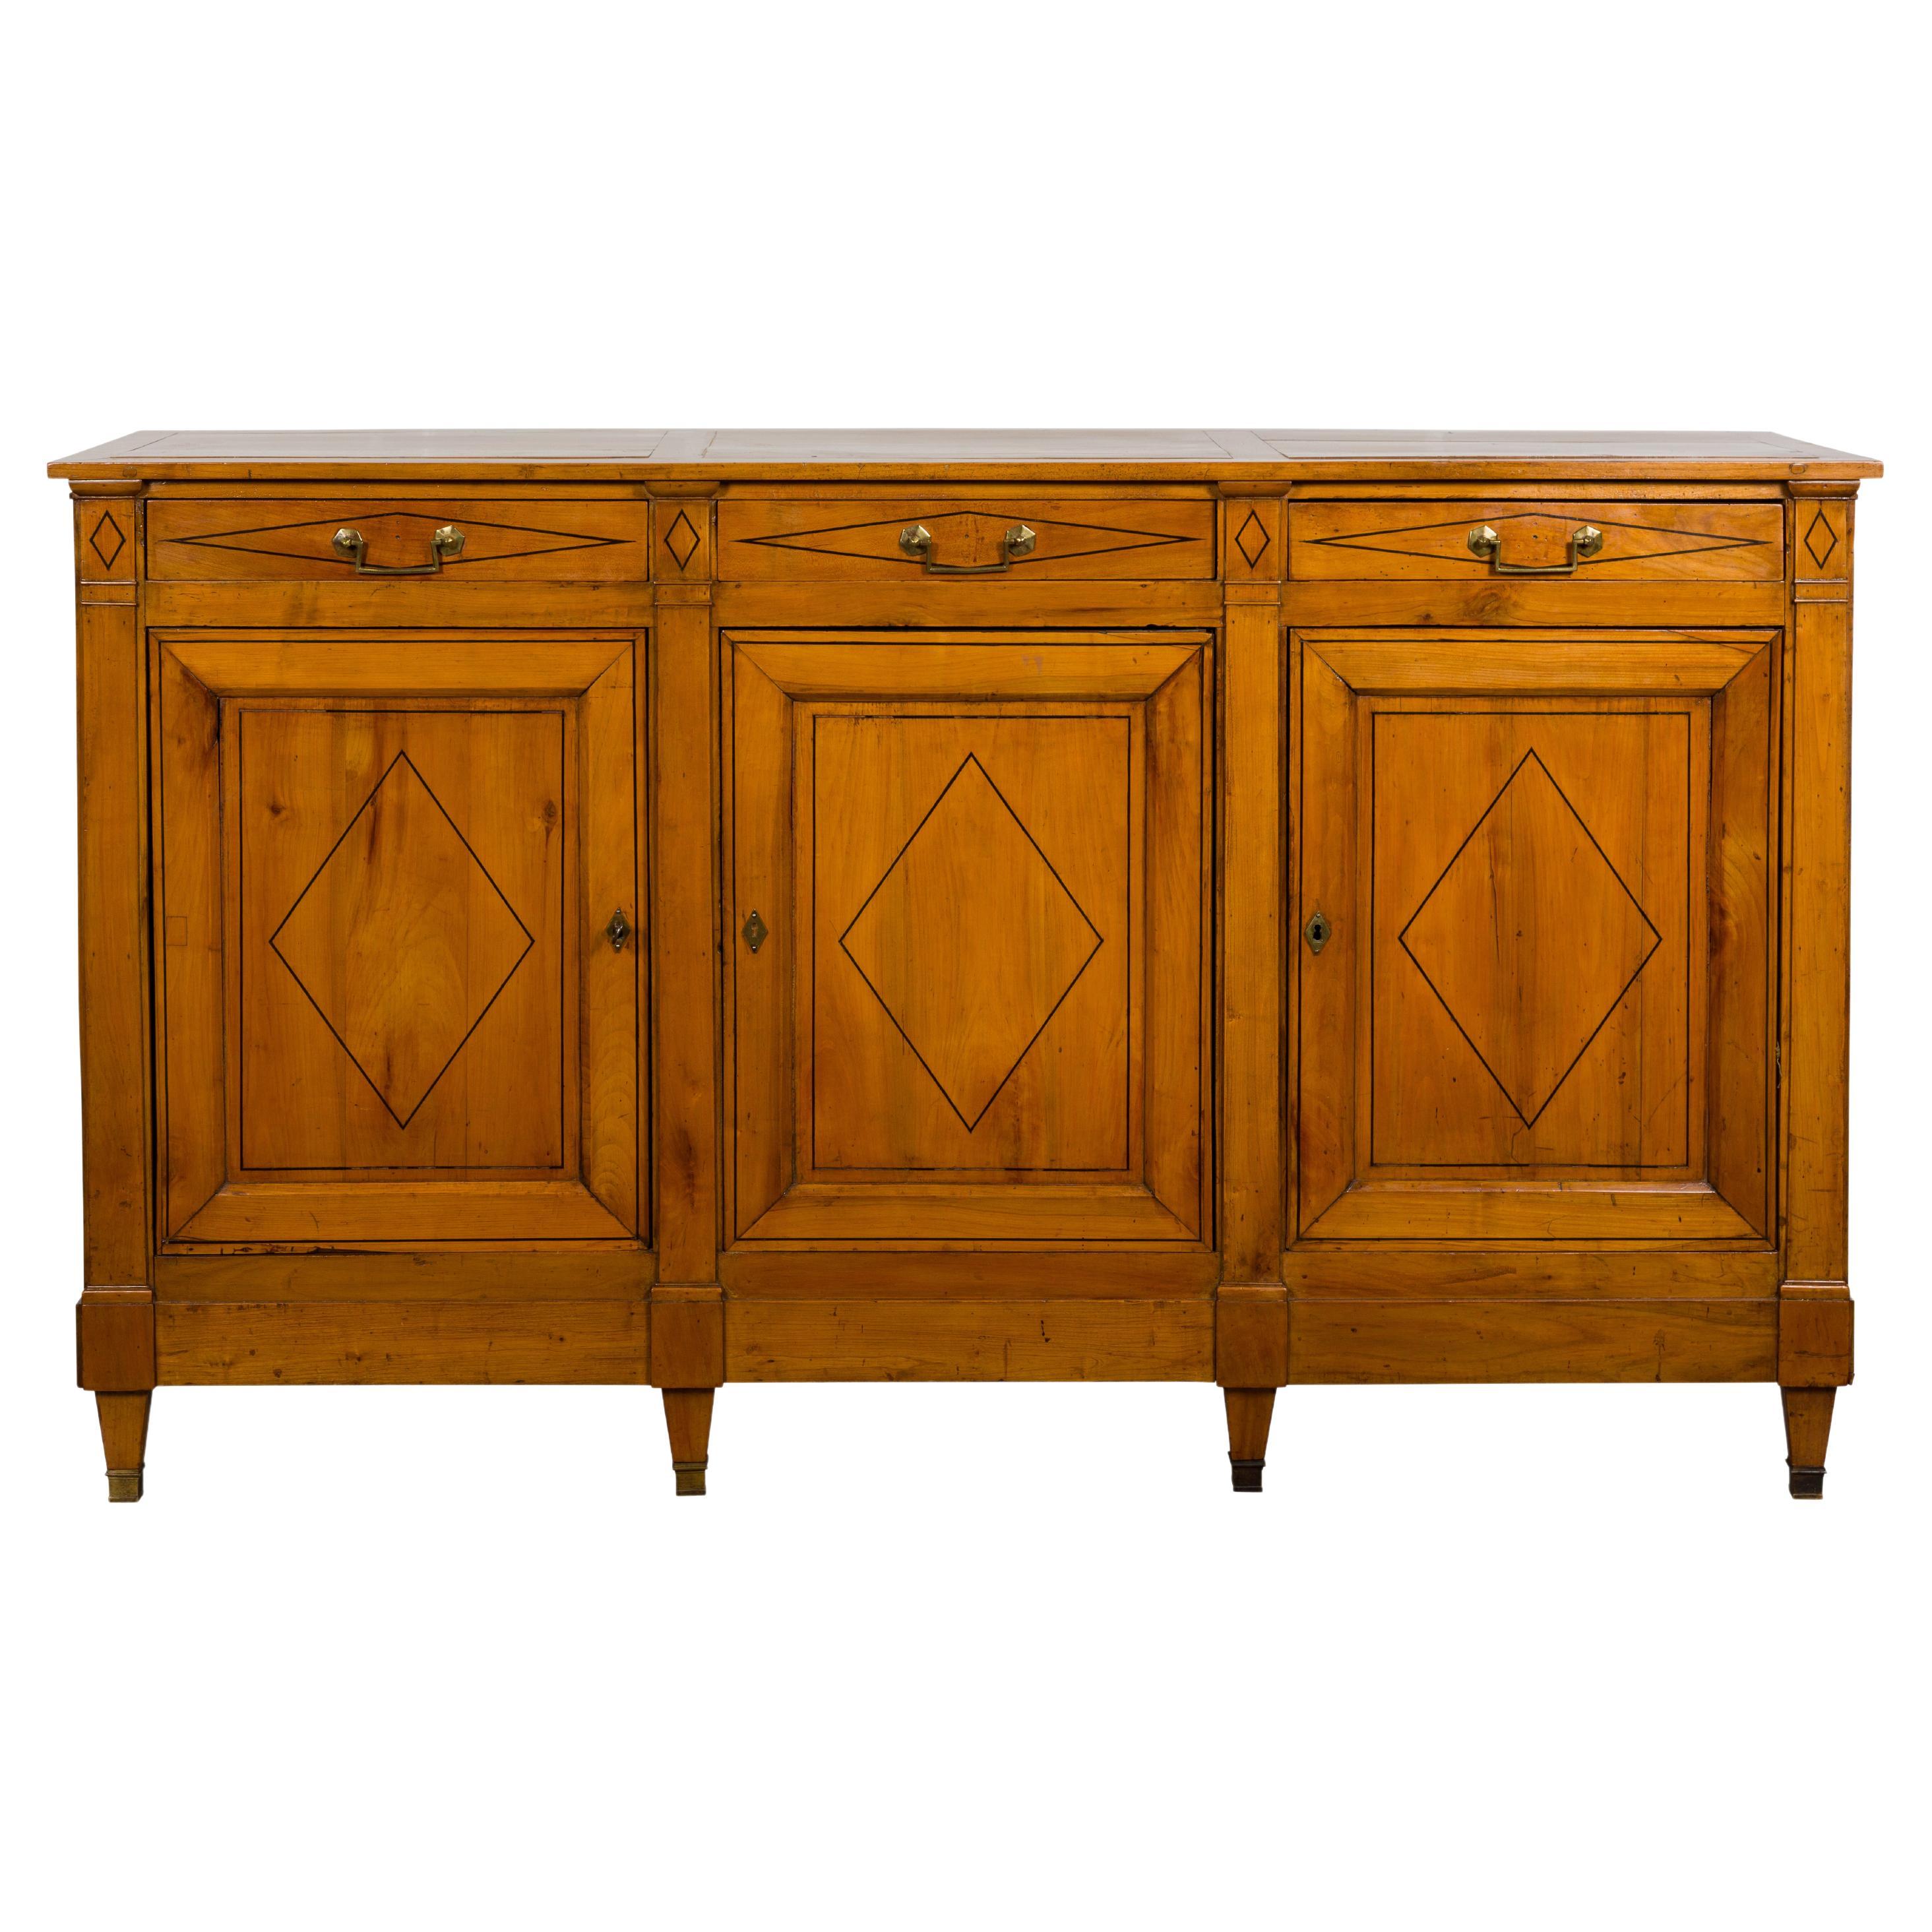 French 19th Century Walnut Enfilade with Three Drawers and Doors, Diamond Motifs